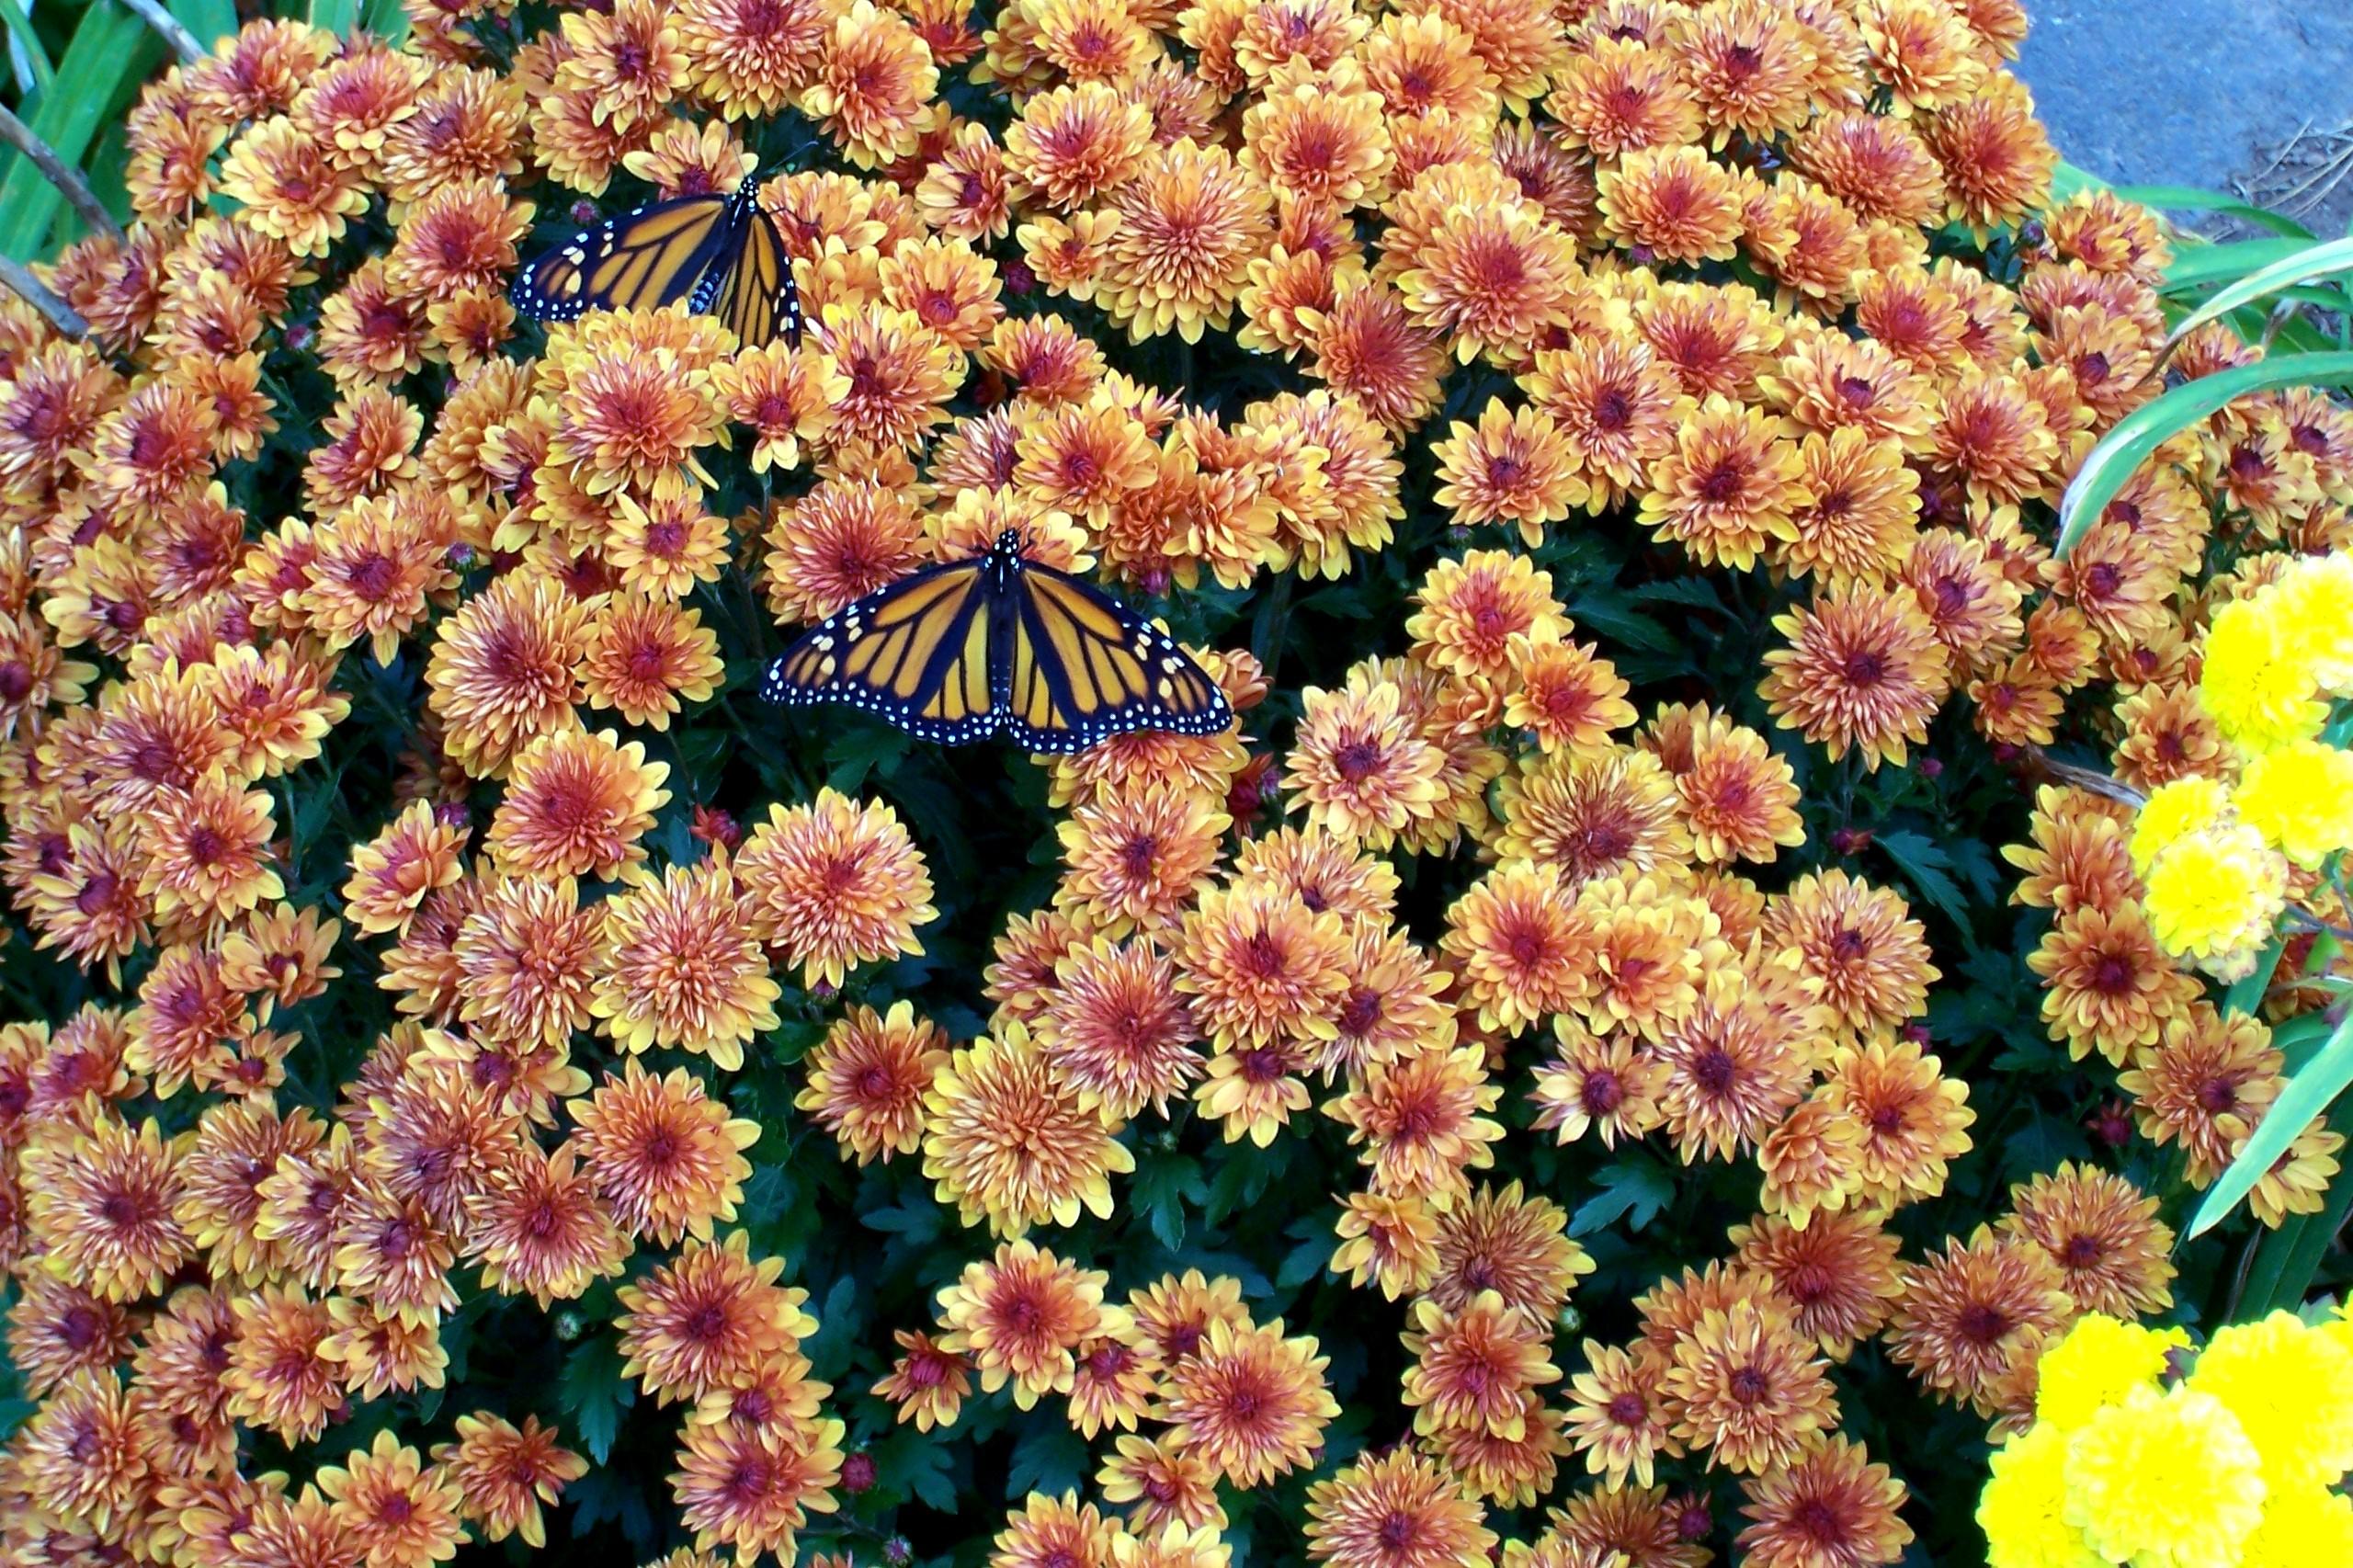 Monarchs at Rest (user submitted)